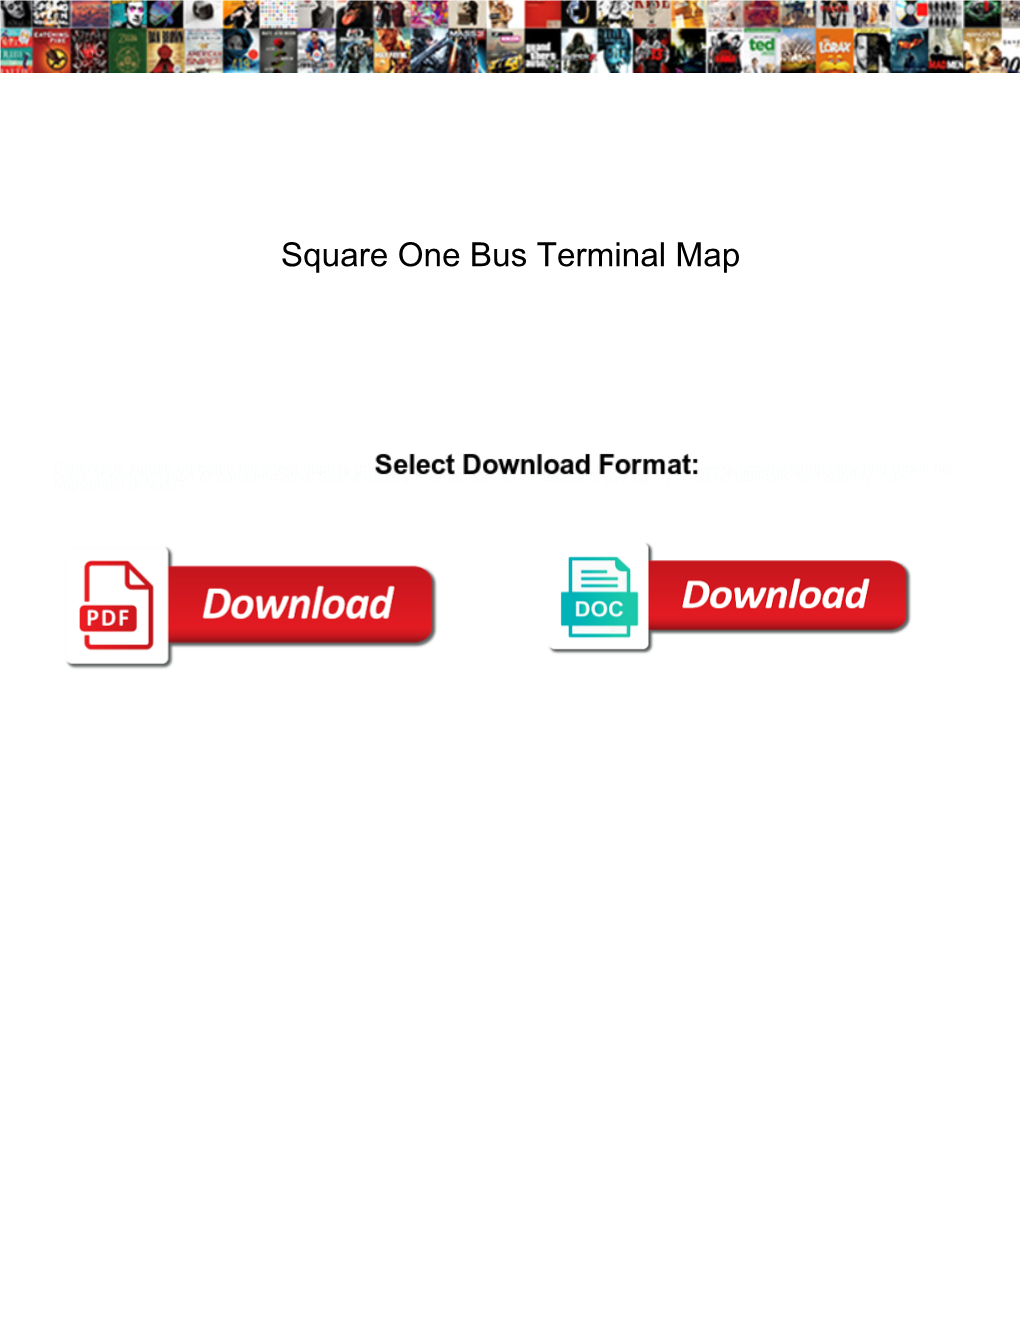 Square One Bus Terminal Map